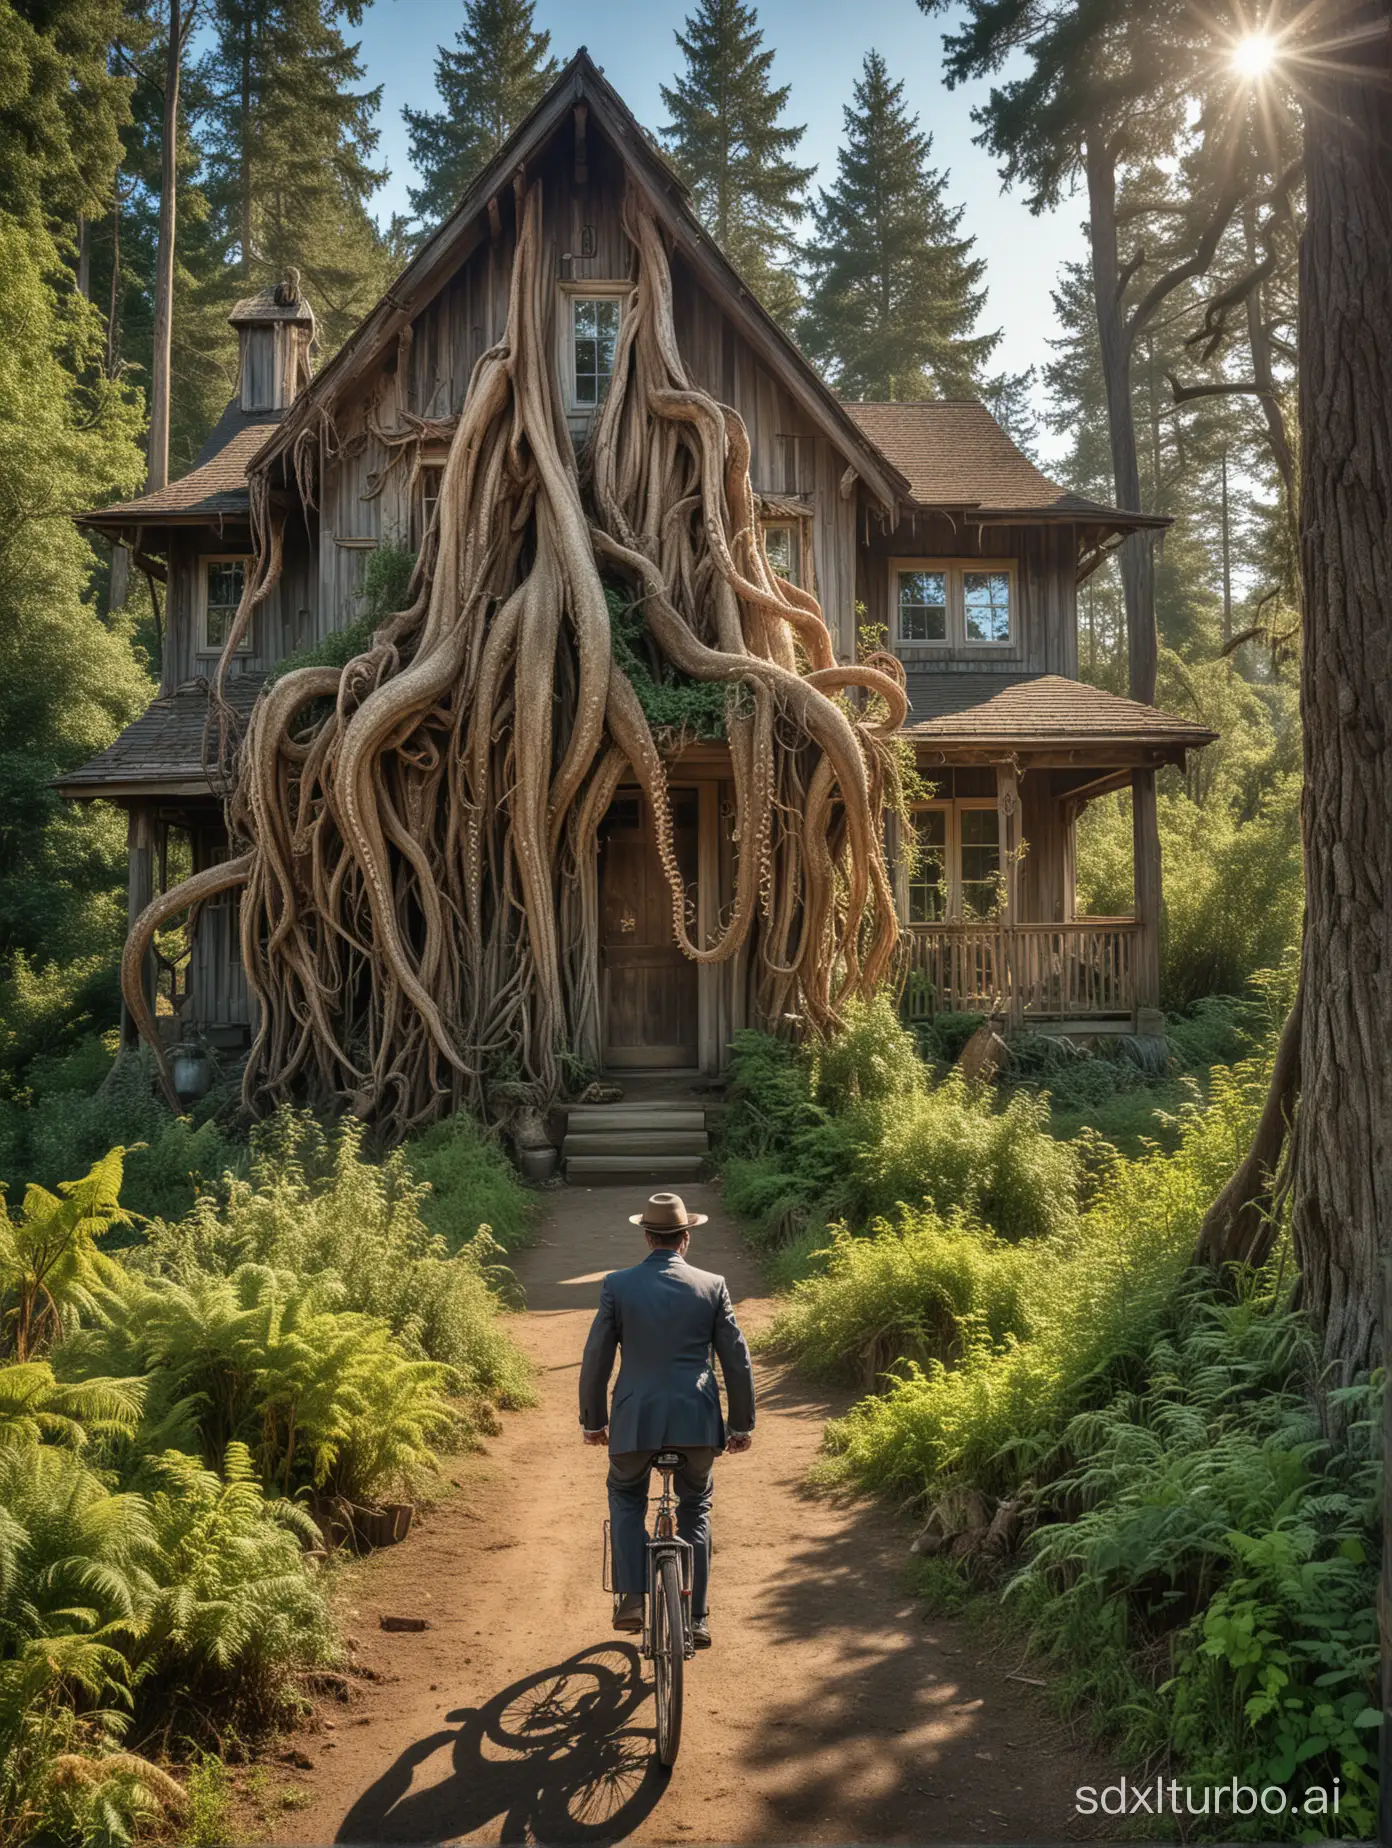 color HDR photograph, pacific northwest dense ancient forest,morning,sunny, a dilapitated, old wooden one story farm house, with giant tentacles emerging from the house, the tentacles are attacking a man in a suit, riding an old fashioned bicycle away from the house in fear, overgrown dirt path leads to front door,